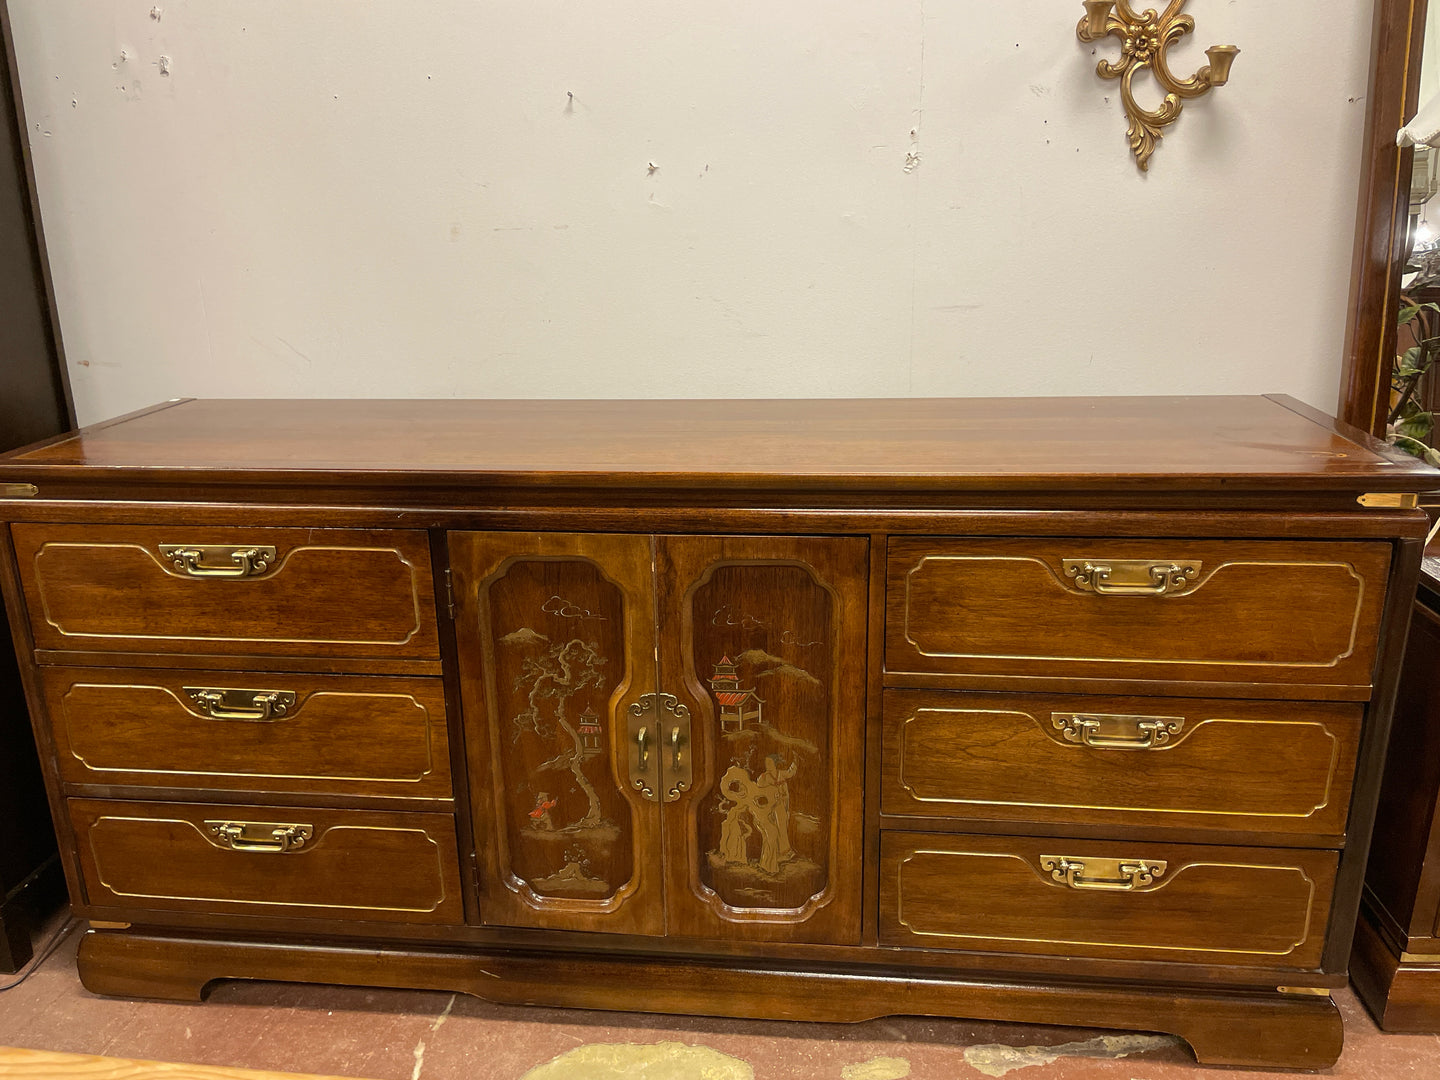 Nine Drawer Long Dresser with Gold Hardware from Century Furniture